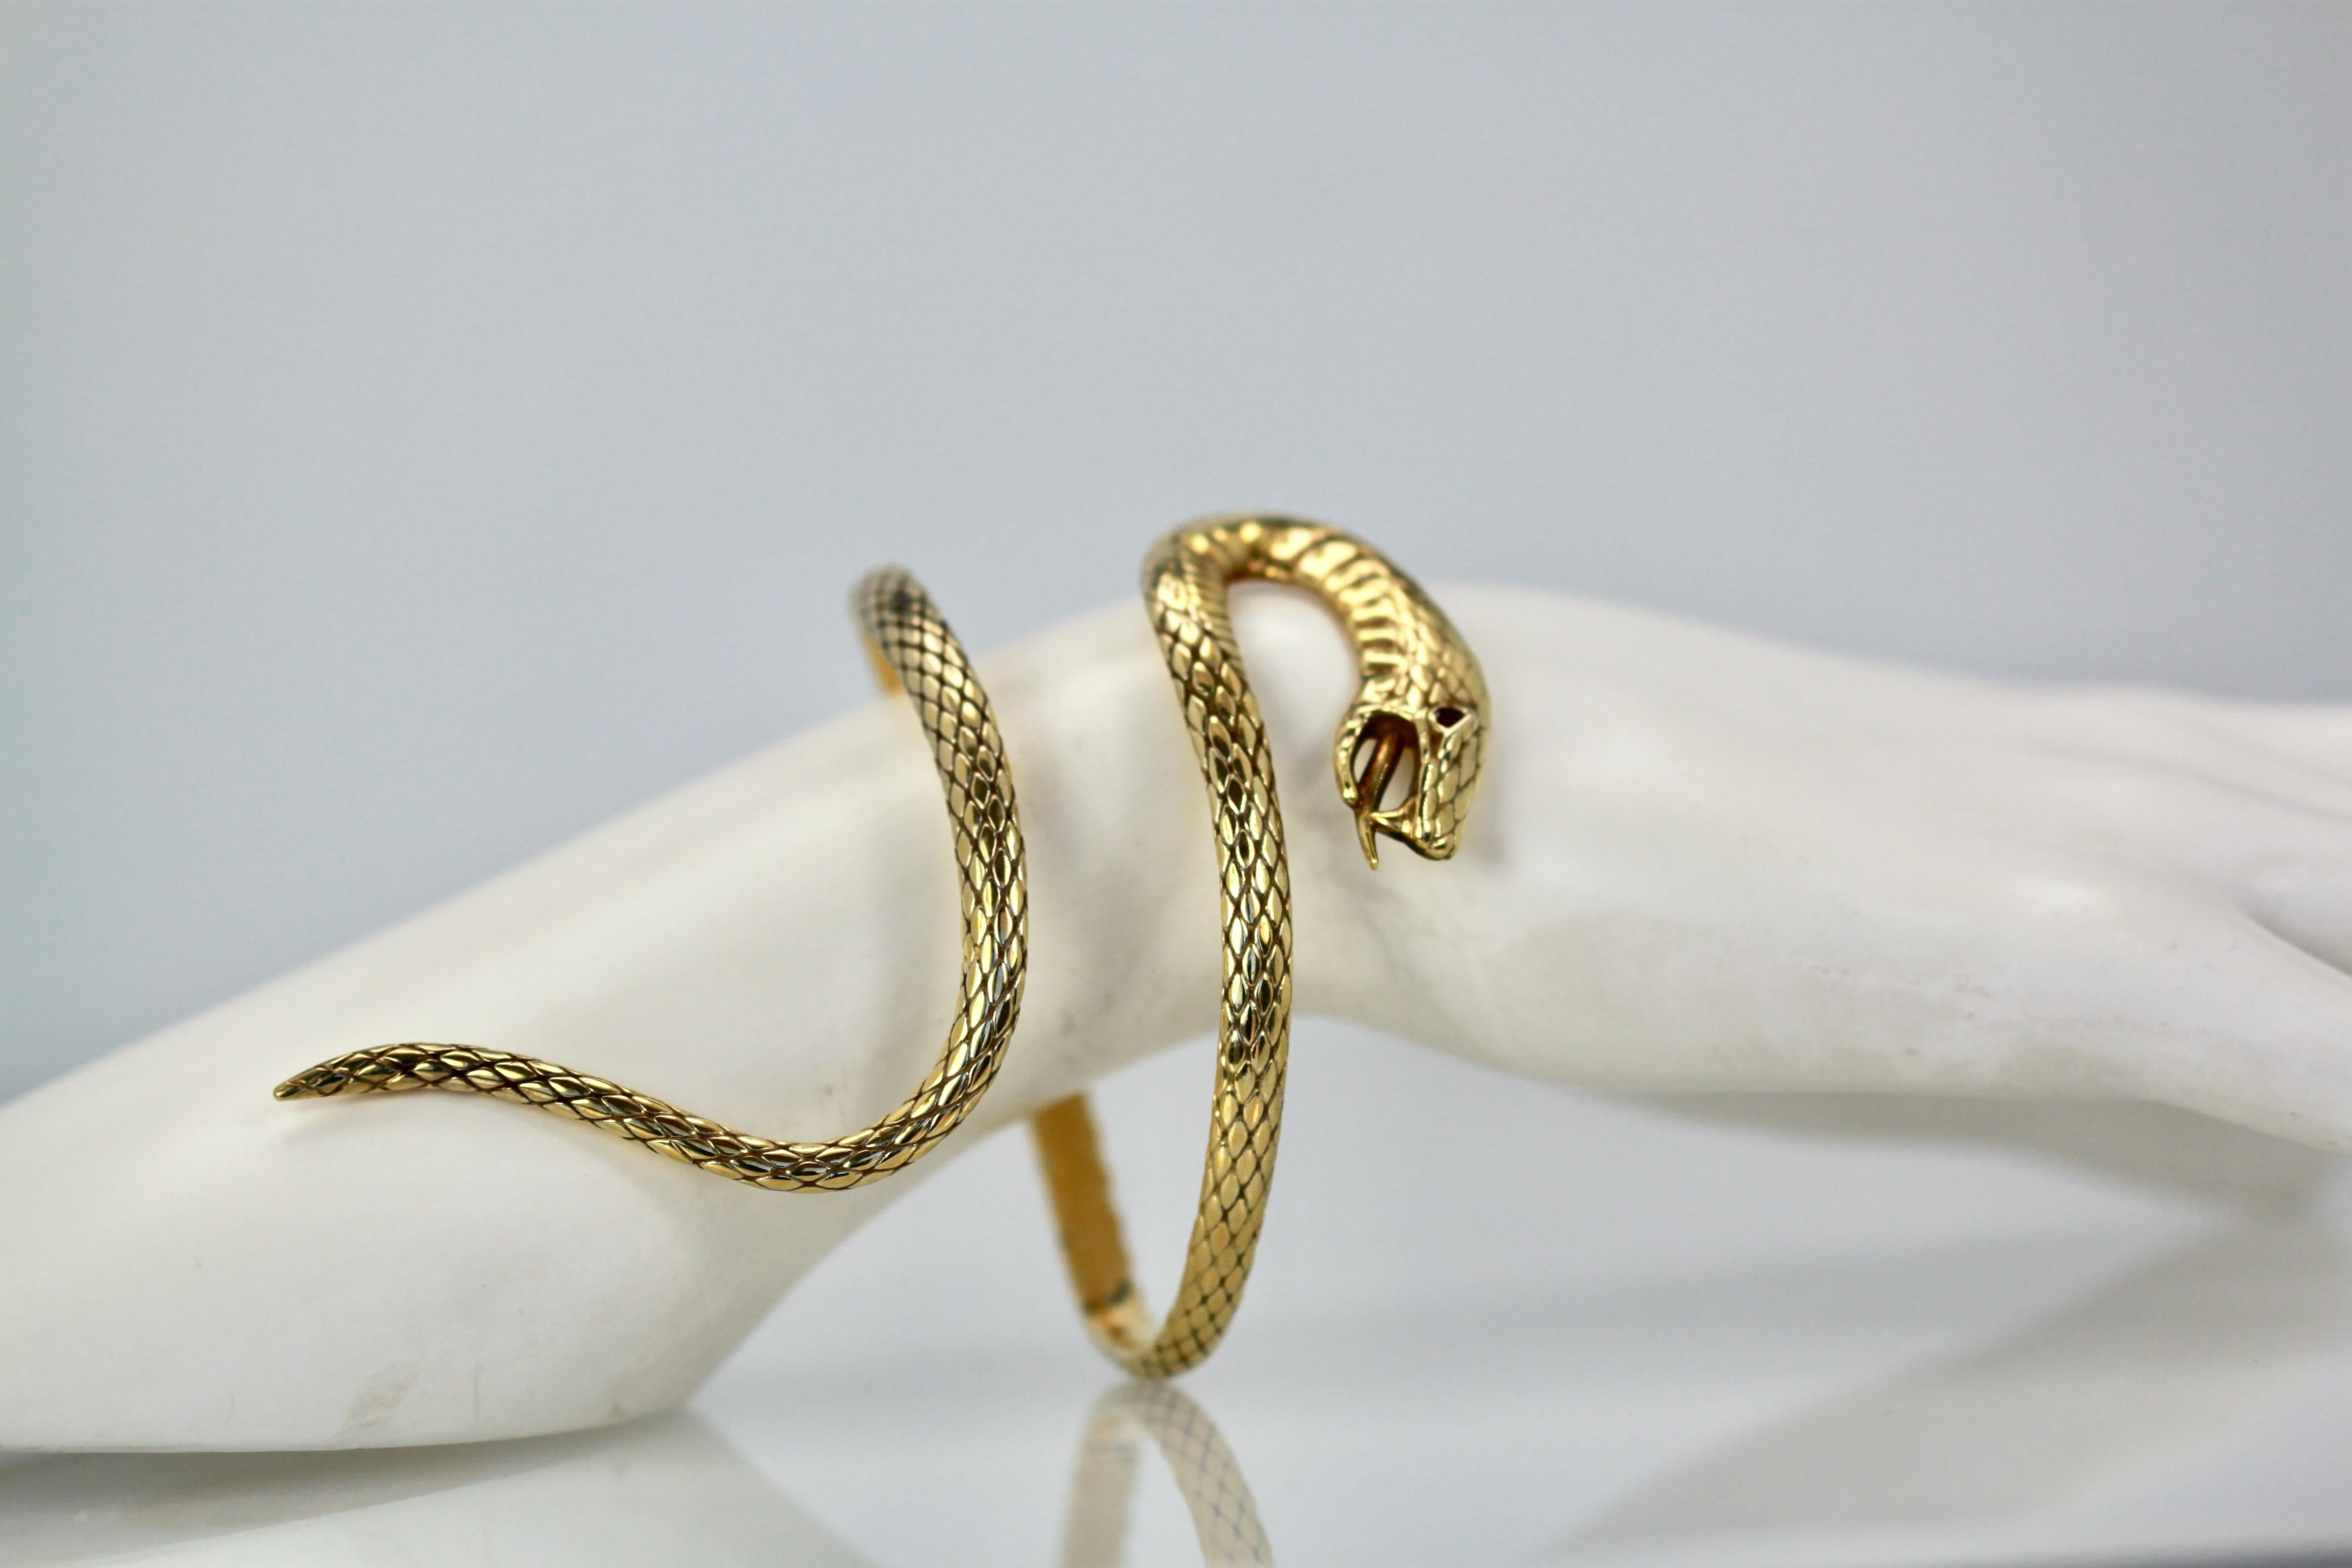 14k Yellow Gold Etched Snake Bracelet Attrib. Stephen Webster In Excellent Condition For Sale In North Hollywood, CA